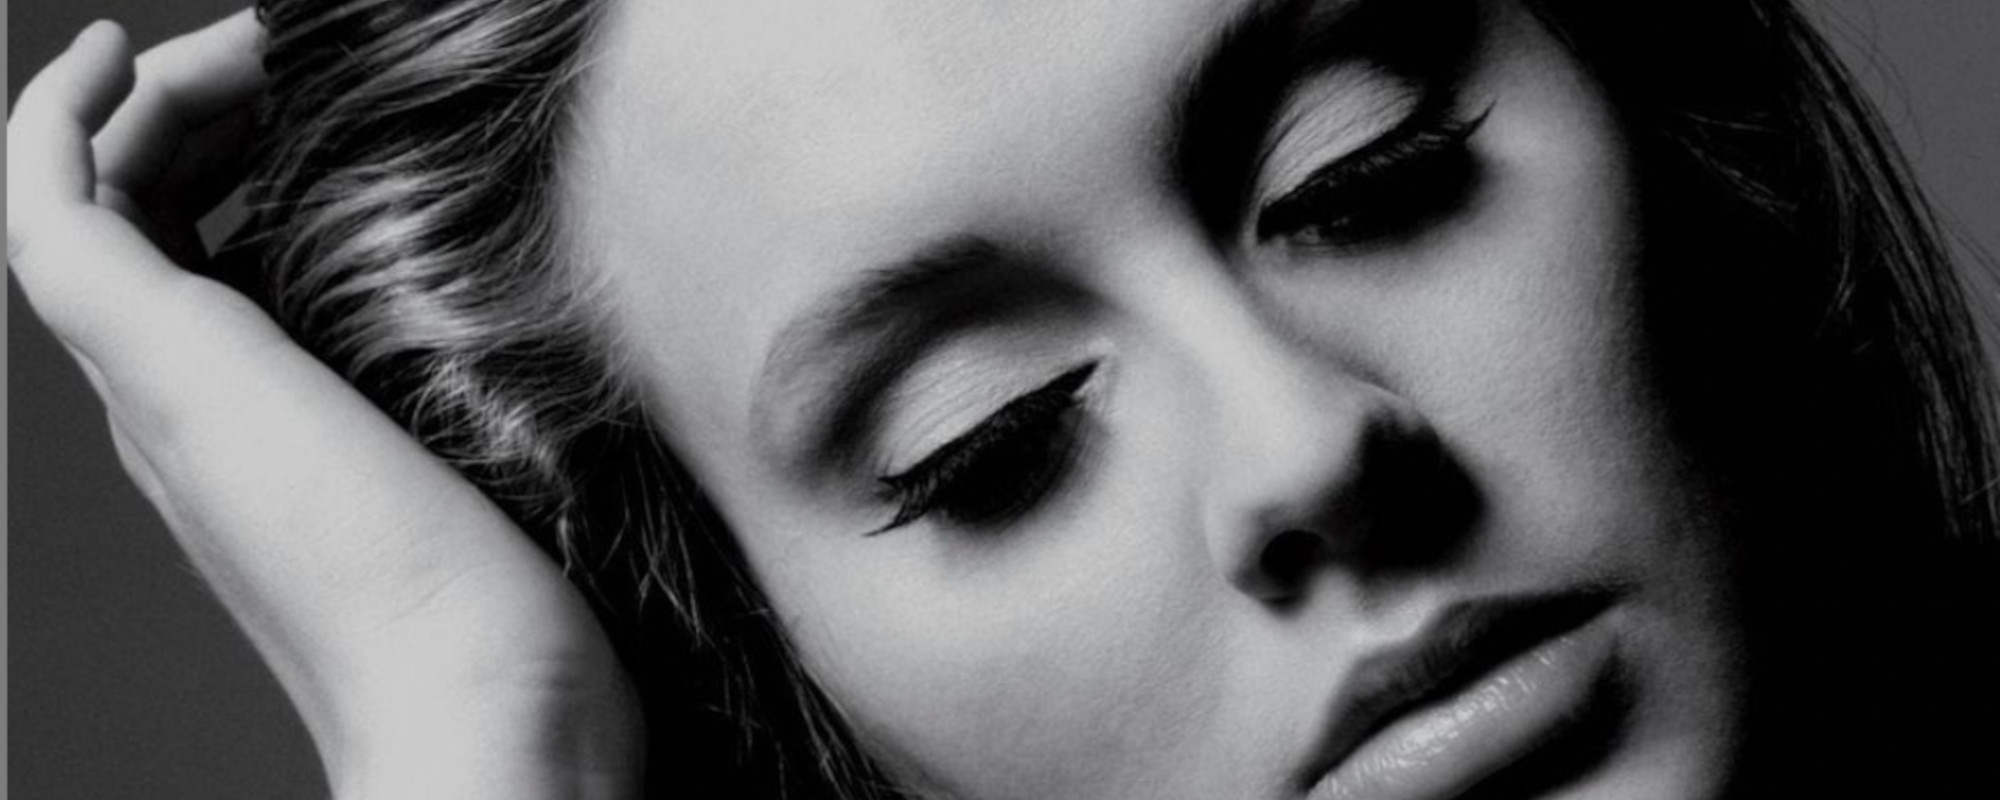 Adele Readies Long-Anticipated Return LP with Teaser Clip of New Single “Easy On Me”